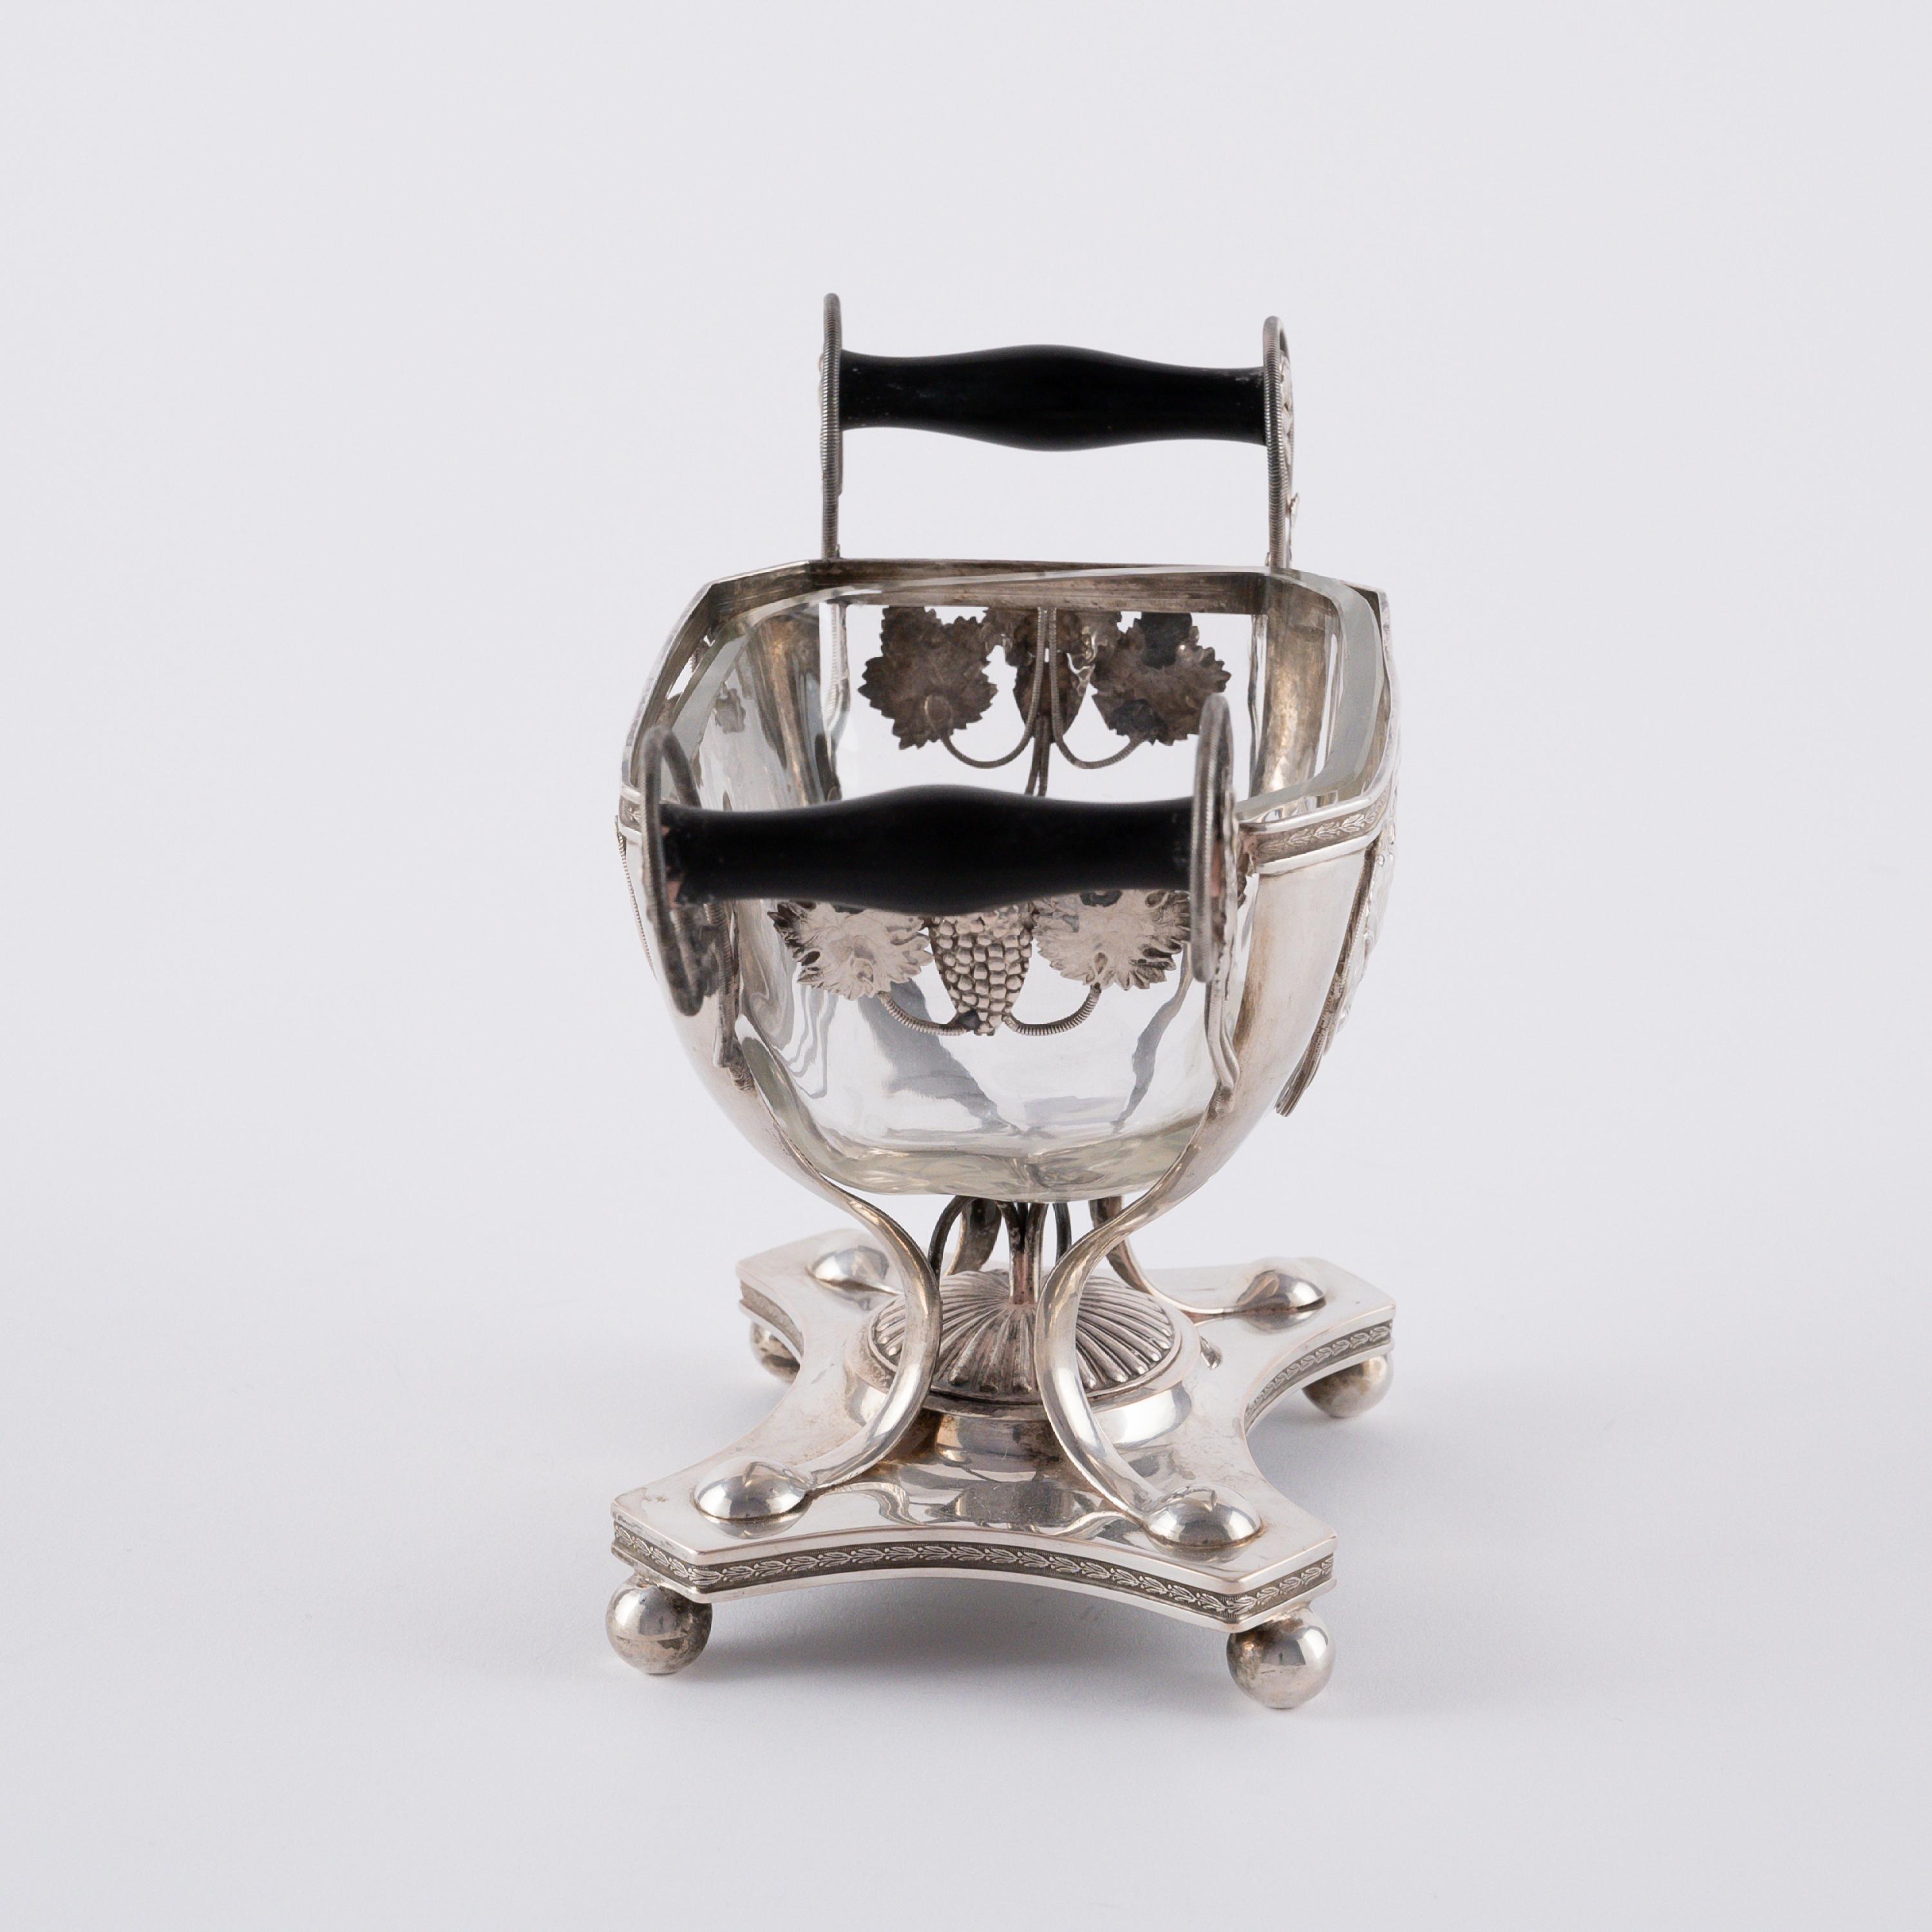 SILVER BIEDEMEIER SUGAR BOWL WITH RIVER GOD - Image 2 of 6